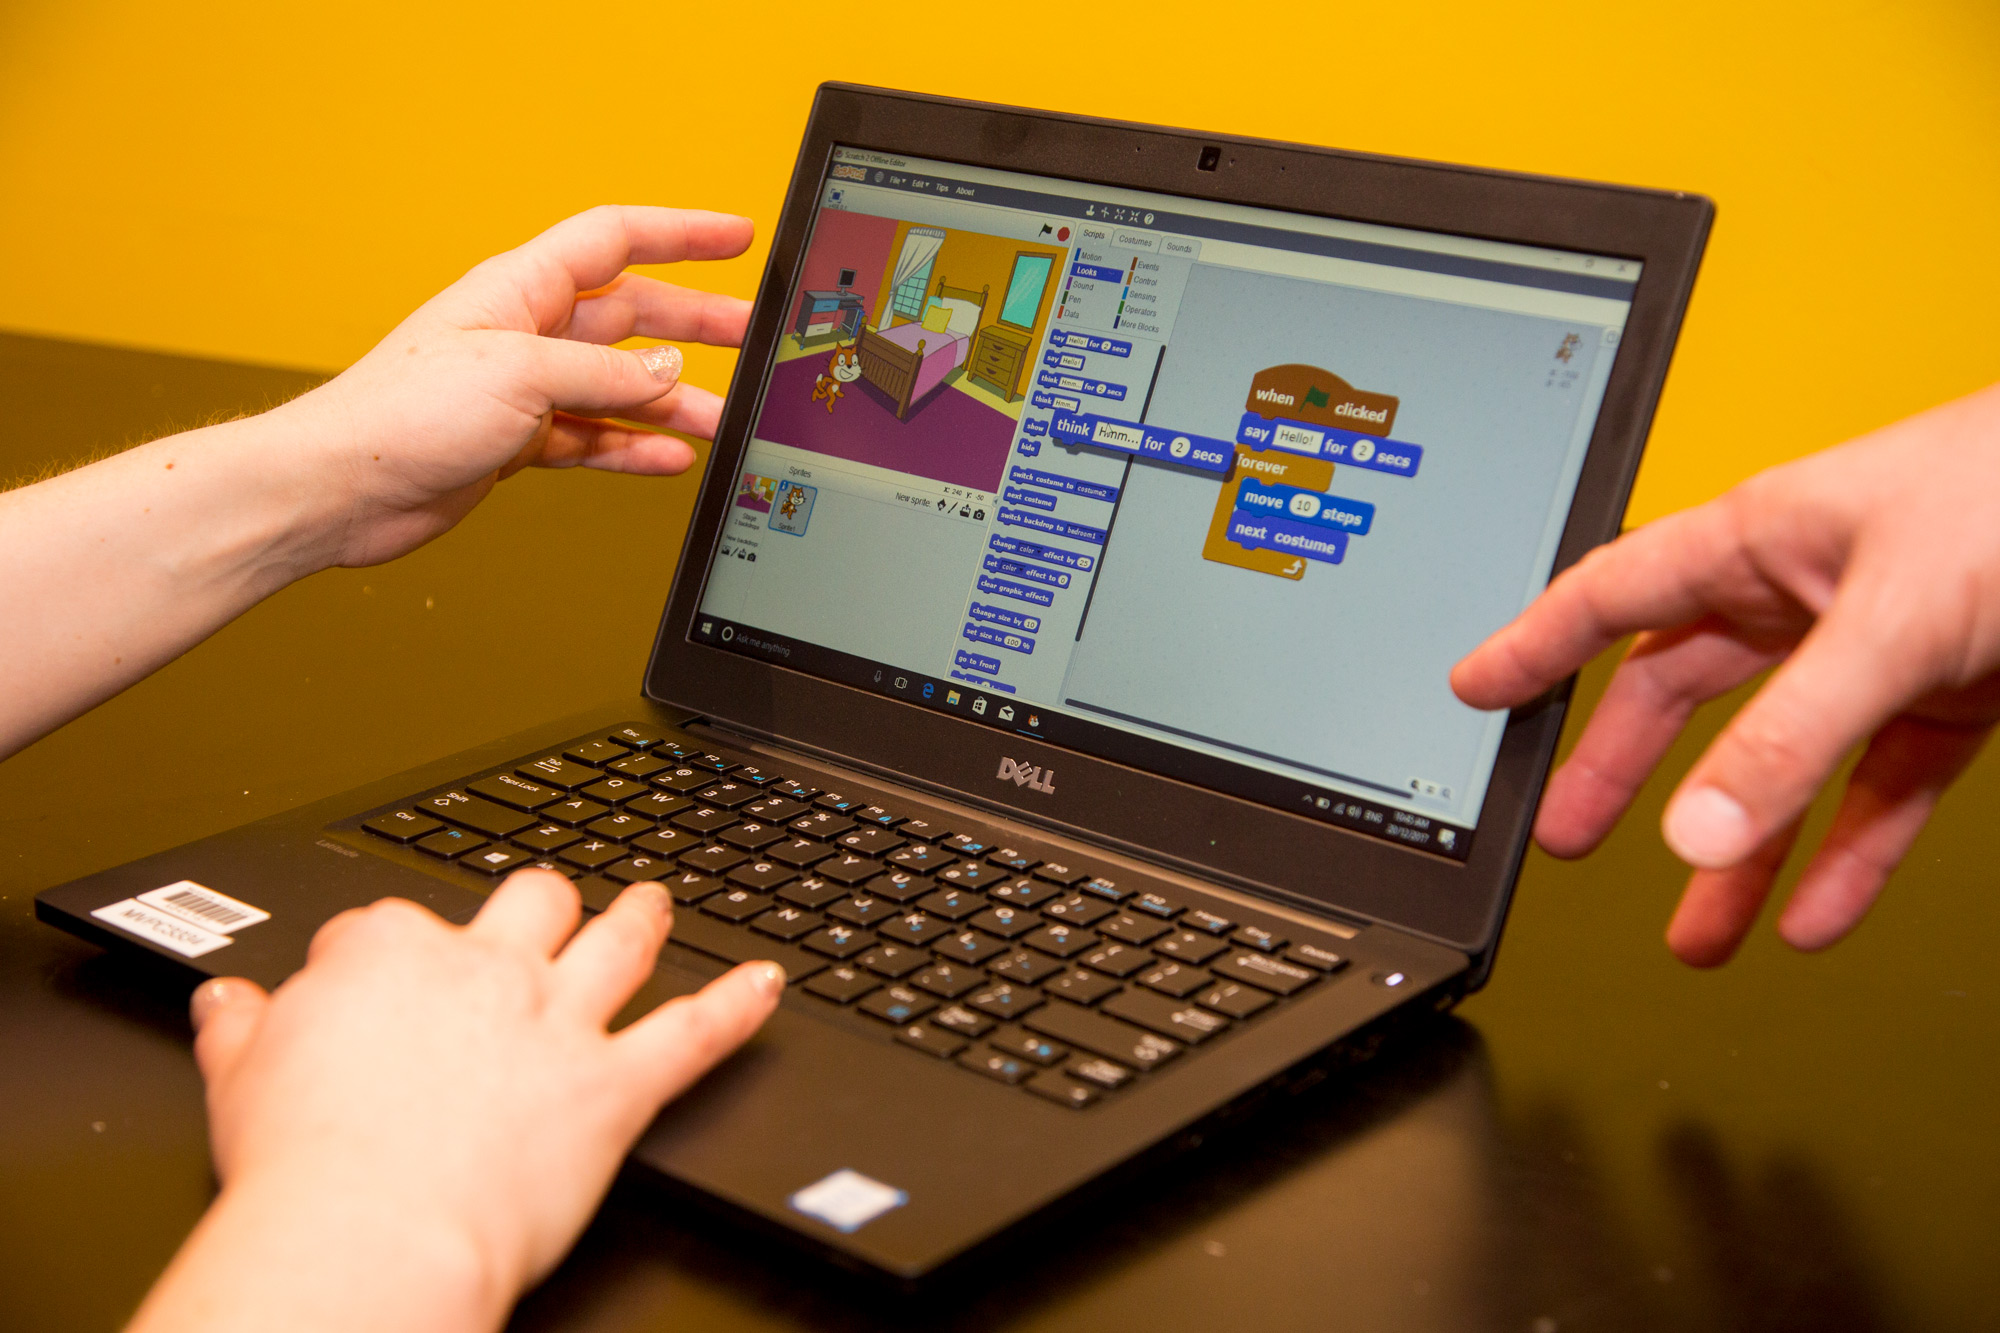 coding with scratch